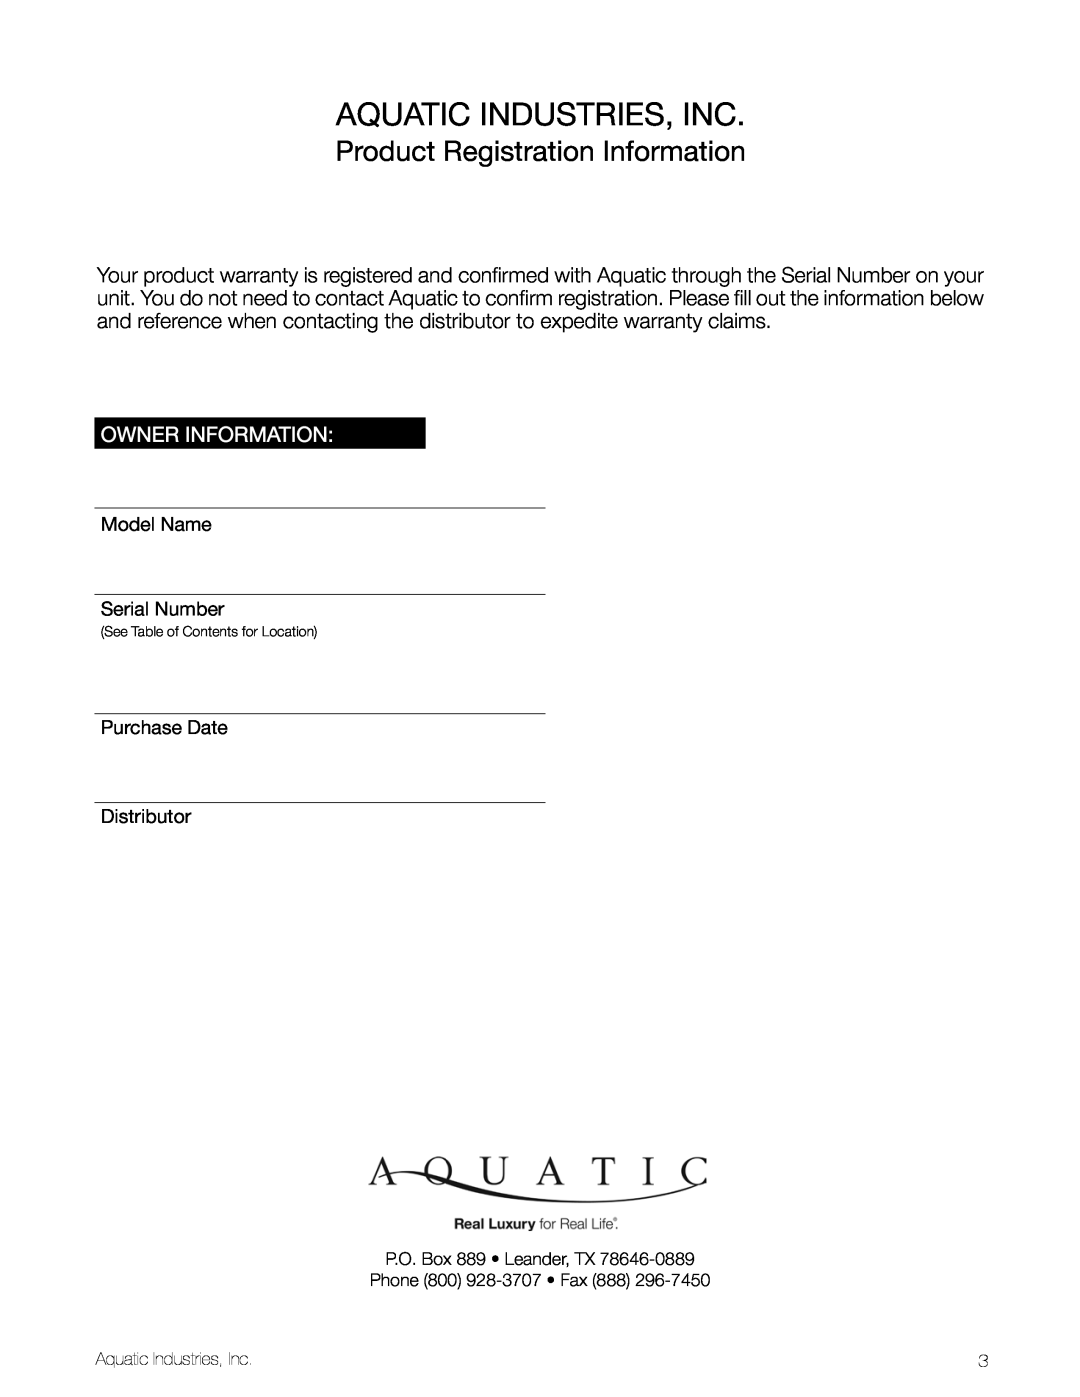 Aquatic LuxeAir Series owner manual Aquatic Industries, Inc, Product Registration Information, Owner Information 